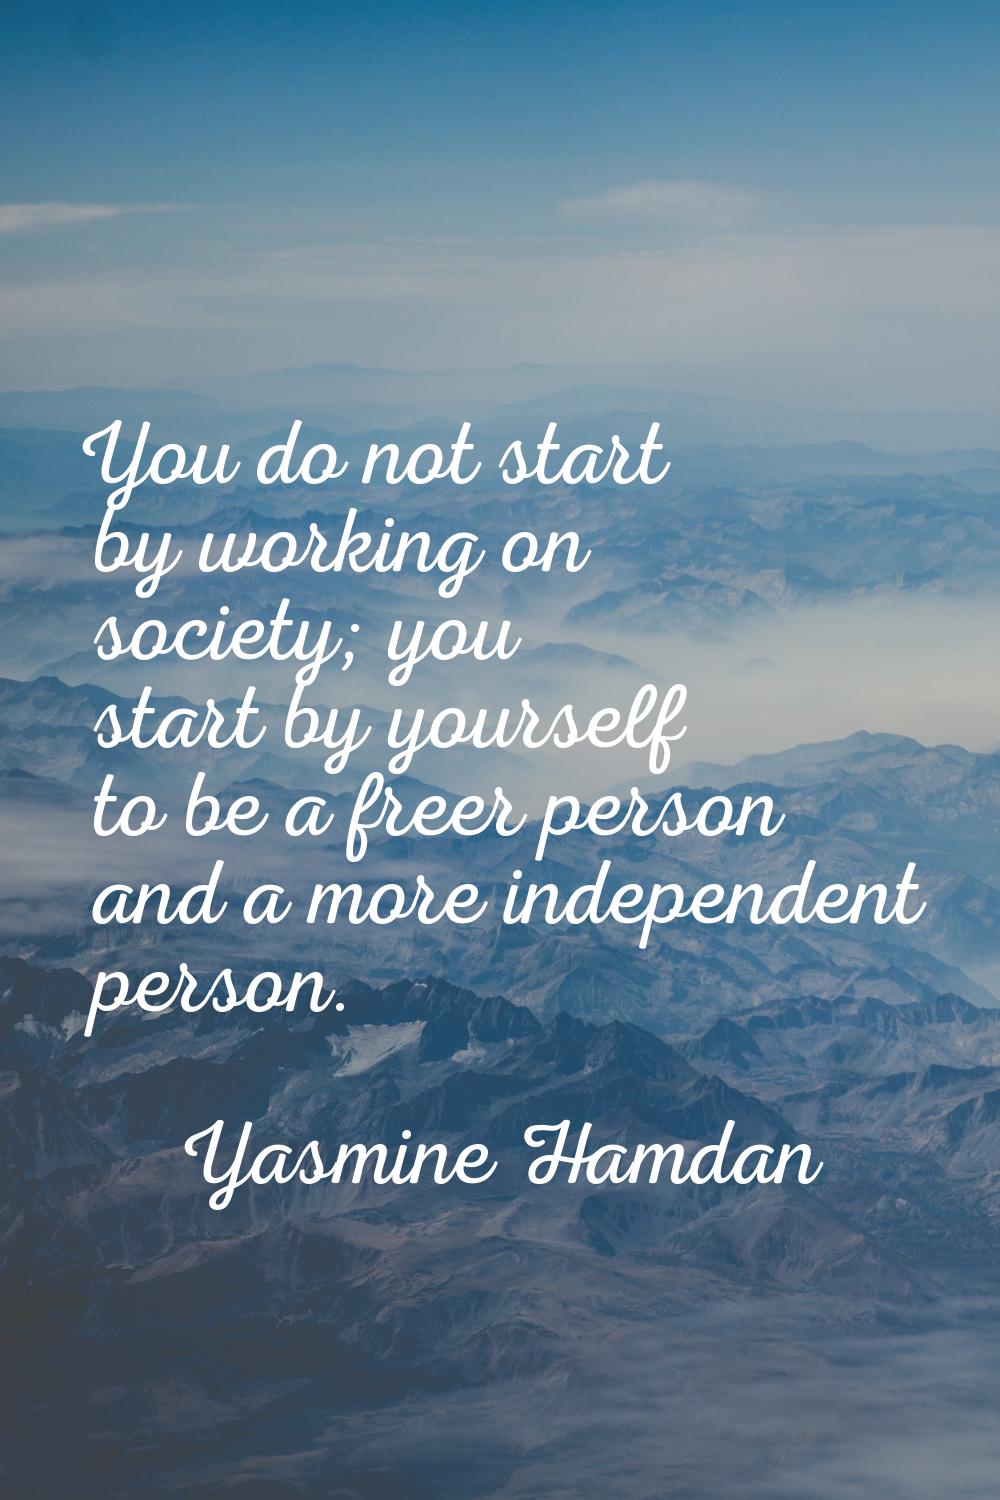 You do not start by working on society; you start by yourself to be a freer person and a more indep